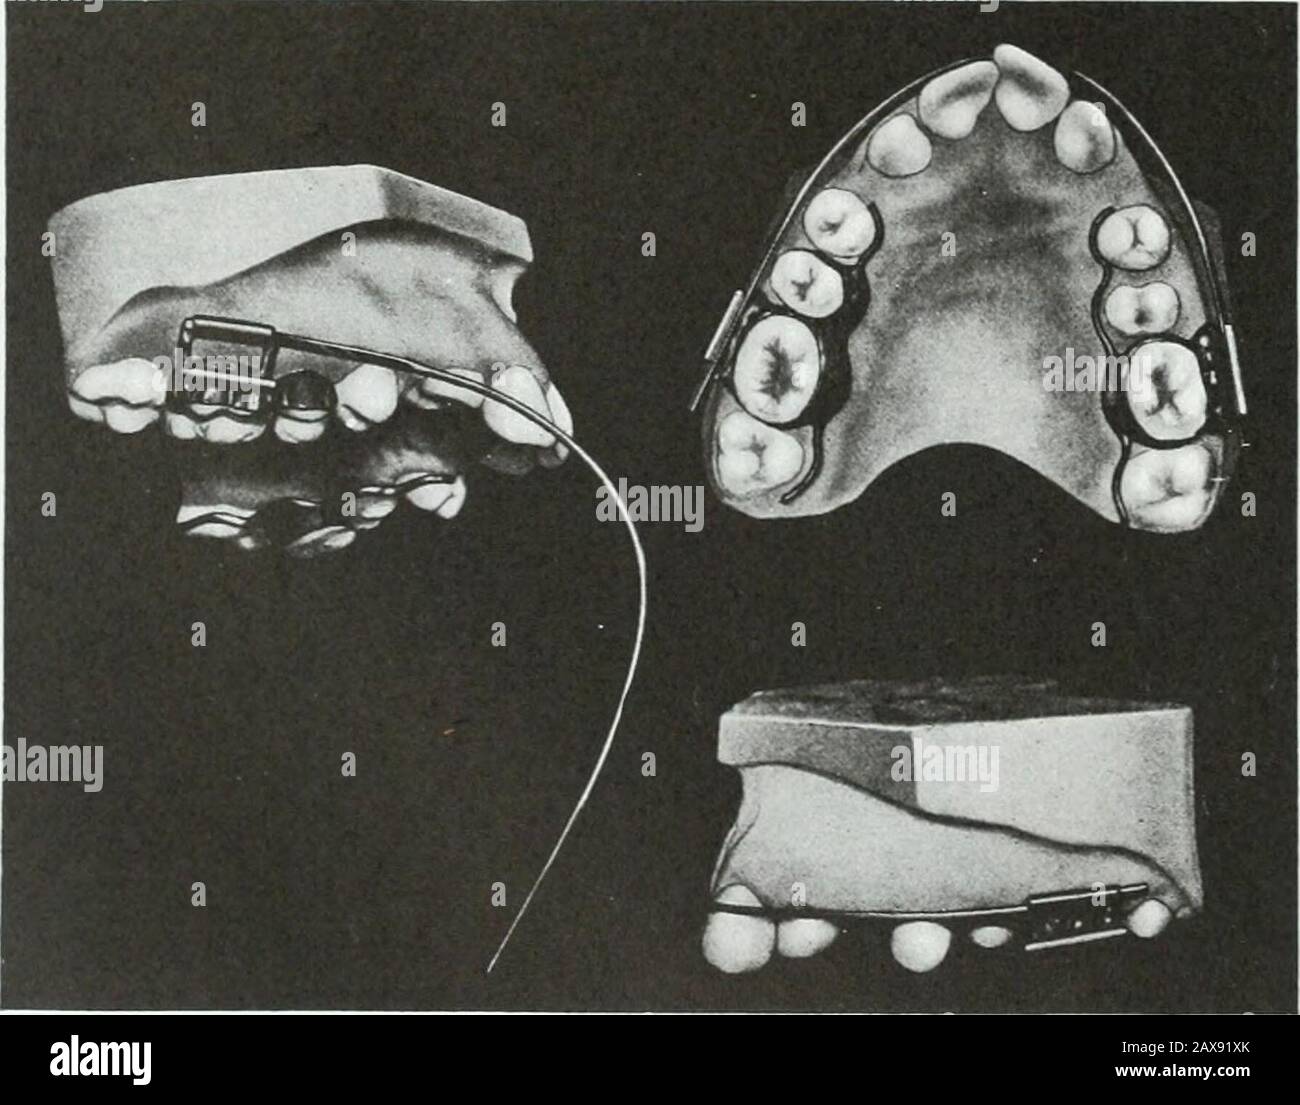 A practical treatise on the technics and principles of dental orthopedia and prosthetic correction of cleft palate . of resistance or weight, shown by the arrows. The bodily disto-mesial movement of buccal teeth to close spaces after extrac-tion so as to leave no inverted V-shaped interproximate space to pocket food is ofthe greatest importance. This is accomplished by ingenious devices for applyingthe power upon lingual and buccal root-wise extensions aided by an occlusal screw 116 PART IV. TECH NIC PRINCIPLES OF PRACTICE bar fulcrum resistance, or by long-bearing telescoping tubes at the occ Stock Photo